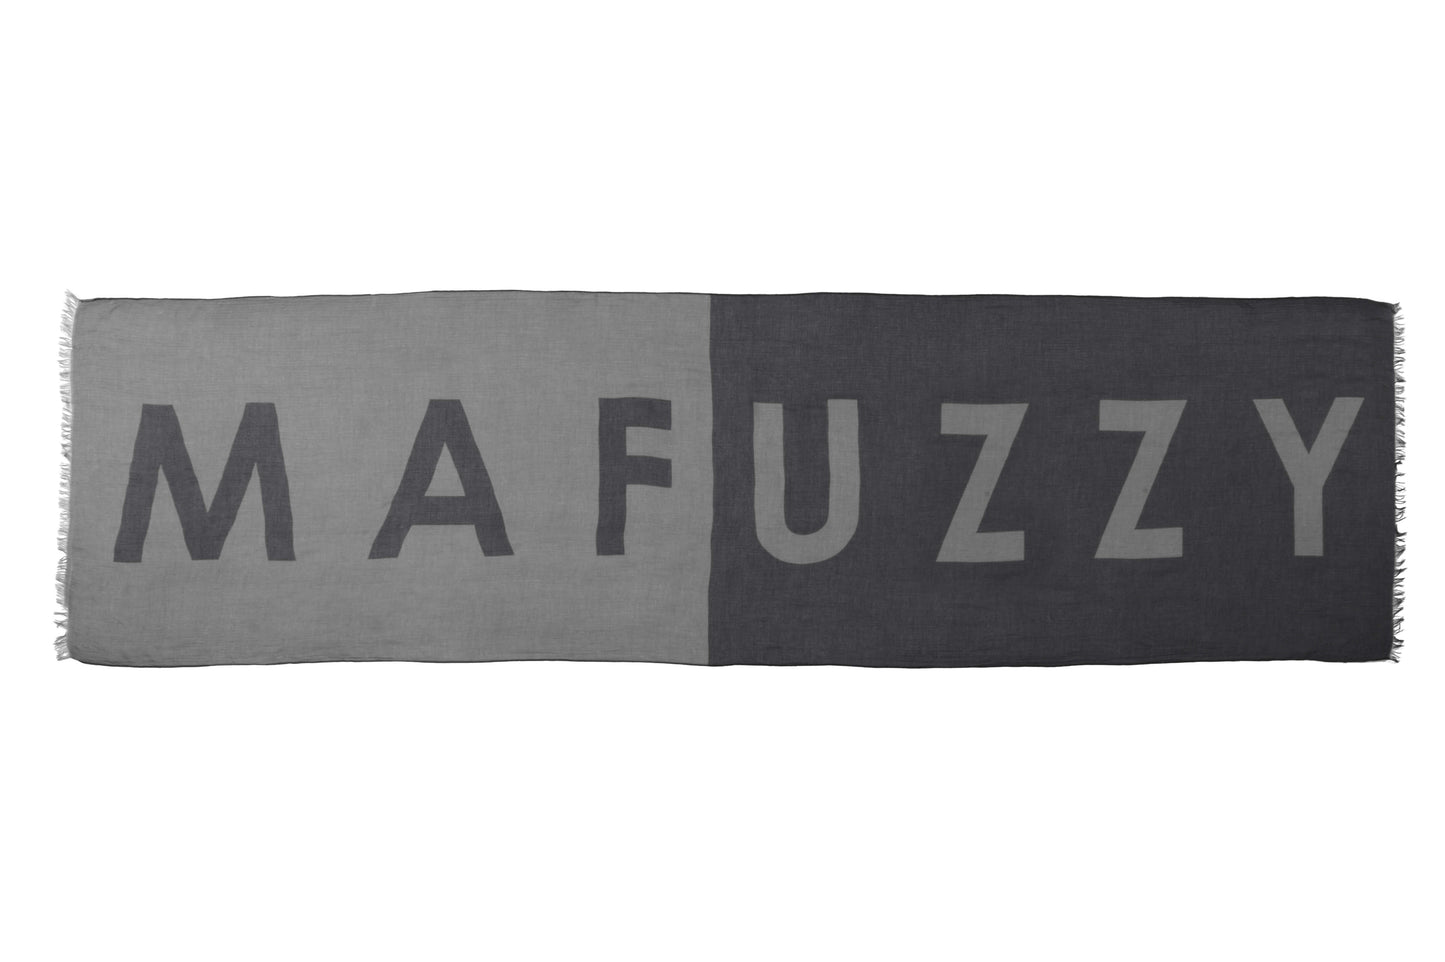 Six and a half foot long, unisex linen blend scarf with "MAFUZZY" text print in Concrete